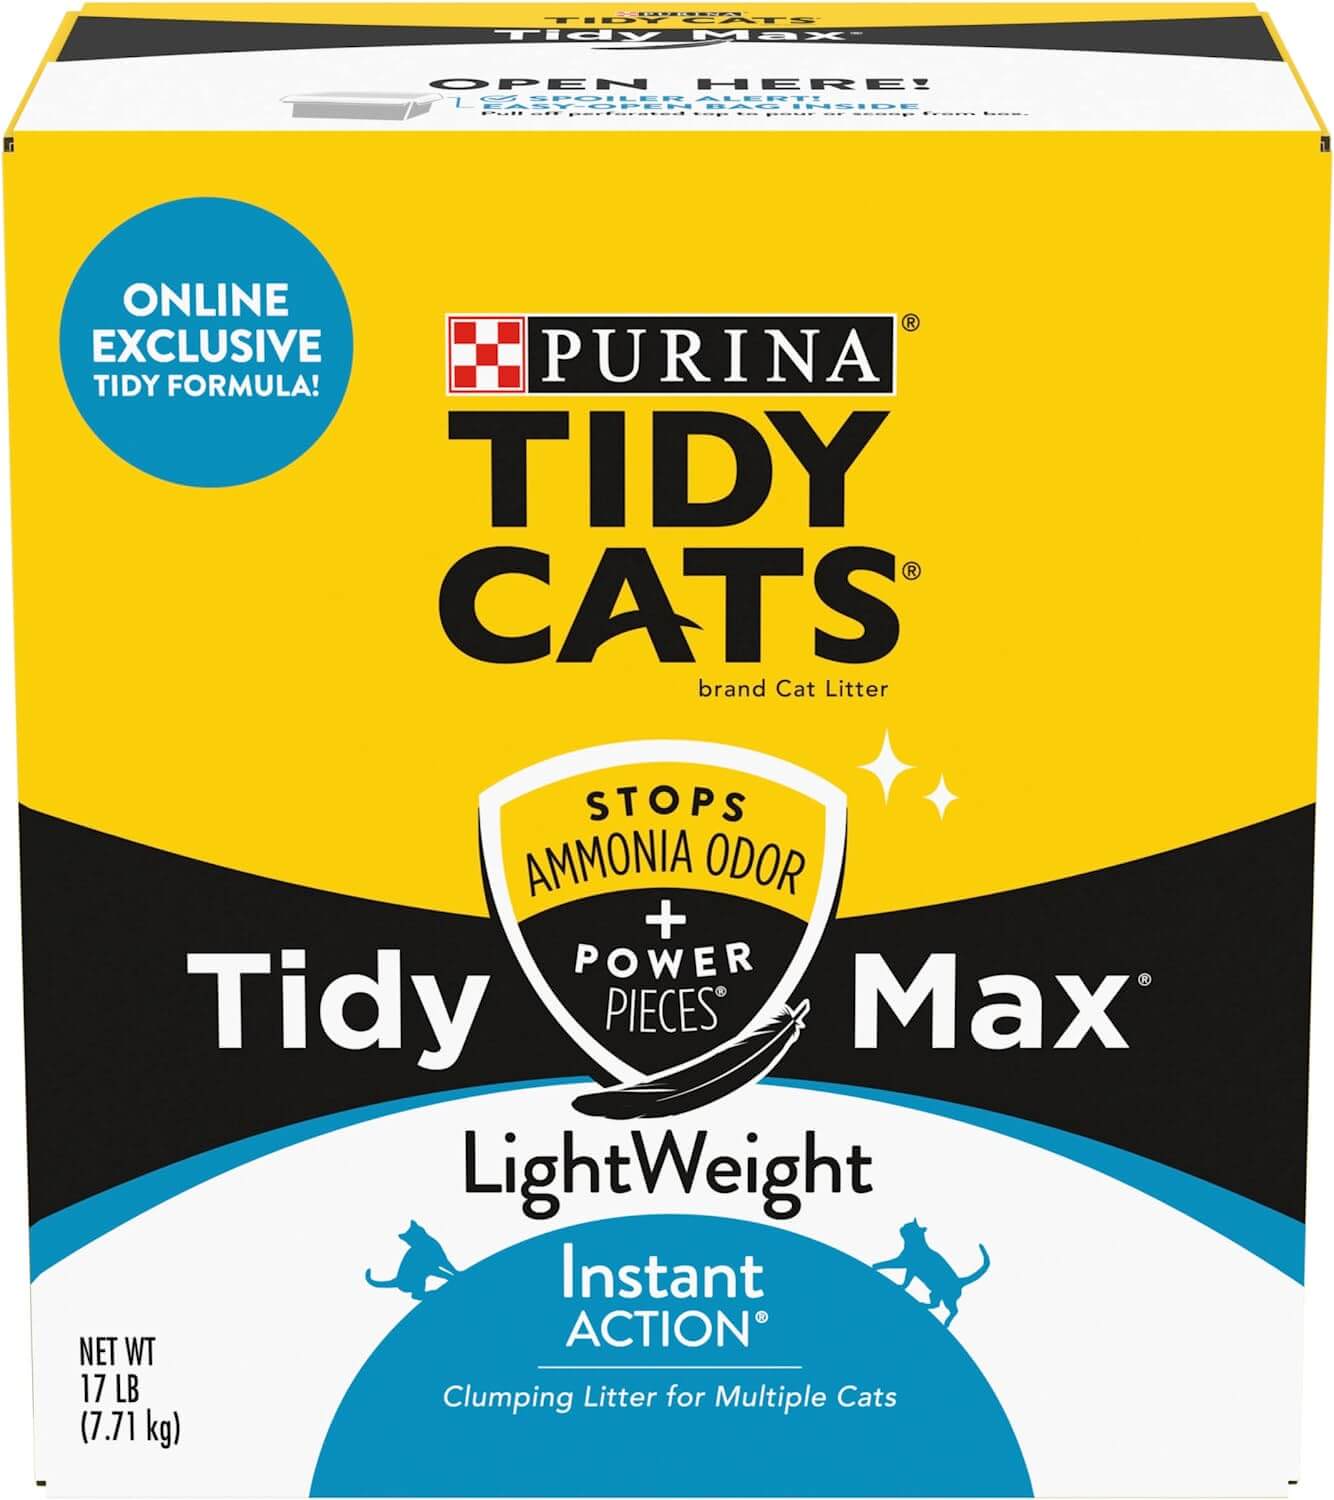 Purina Tidy Cats LightWeight Clumping Cat Litter Tidy Max Instant Action Formula